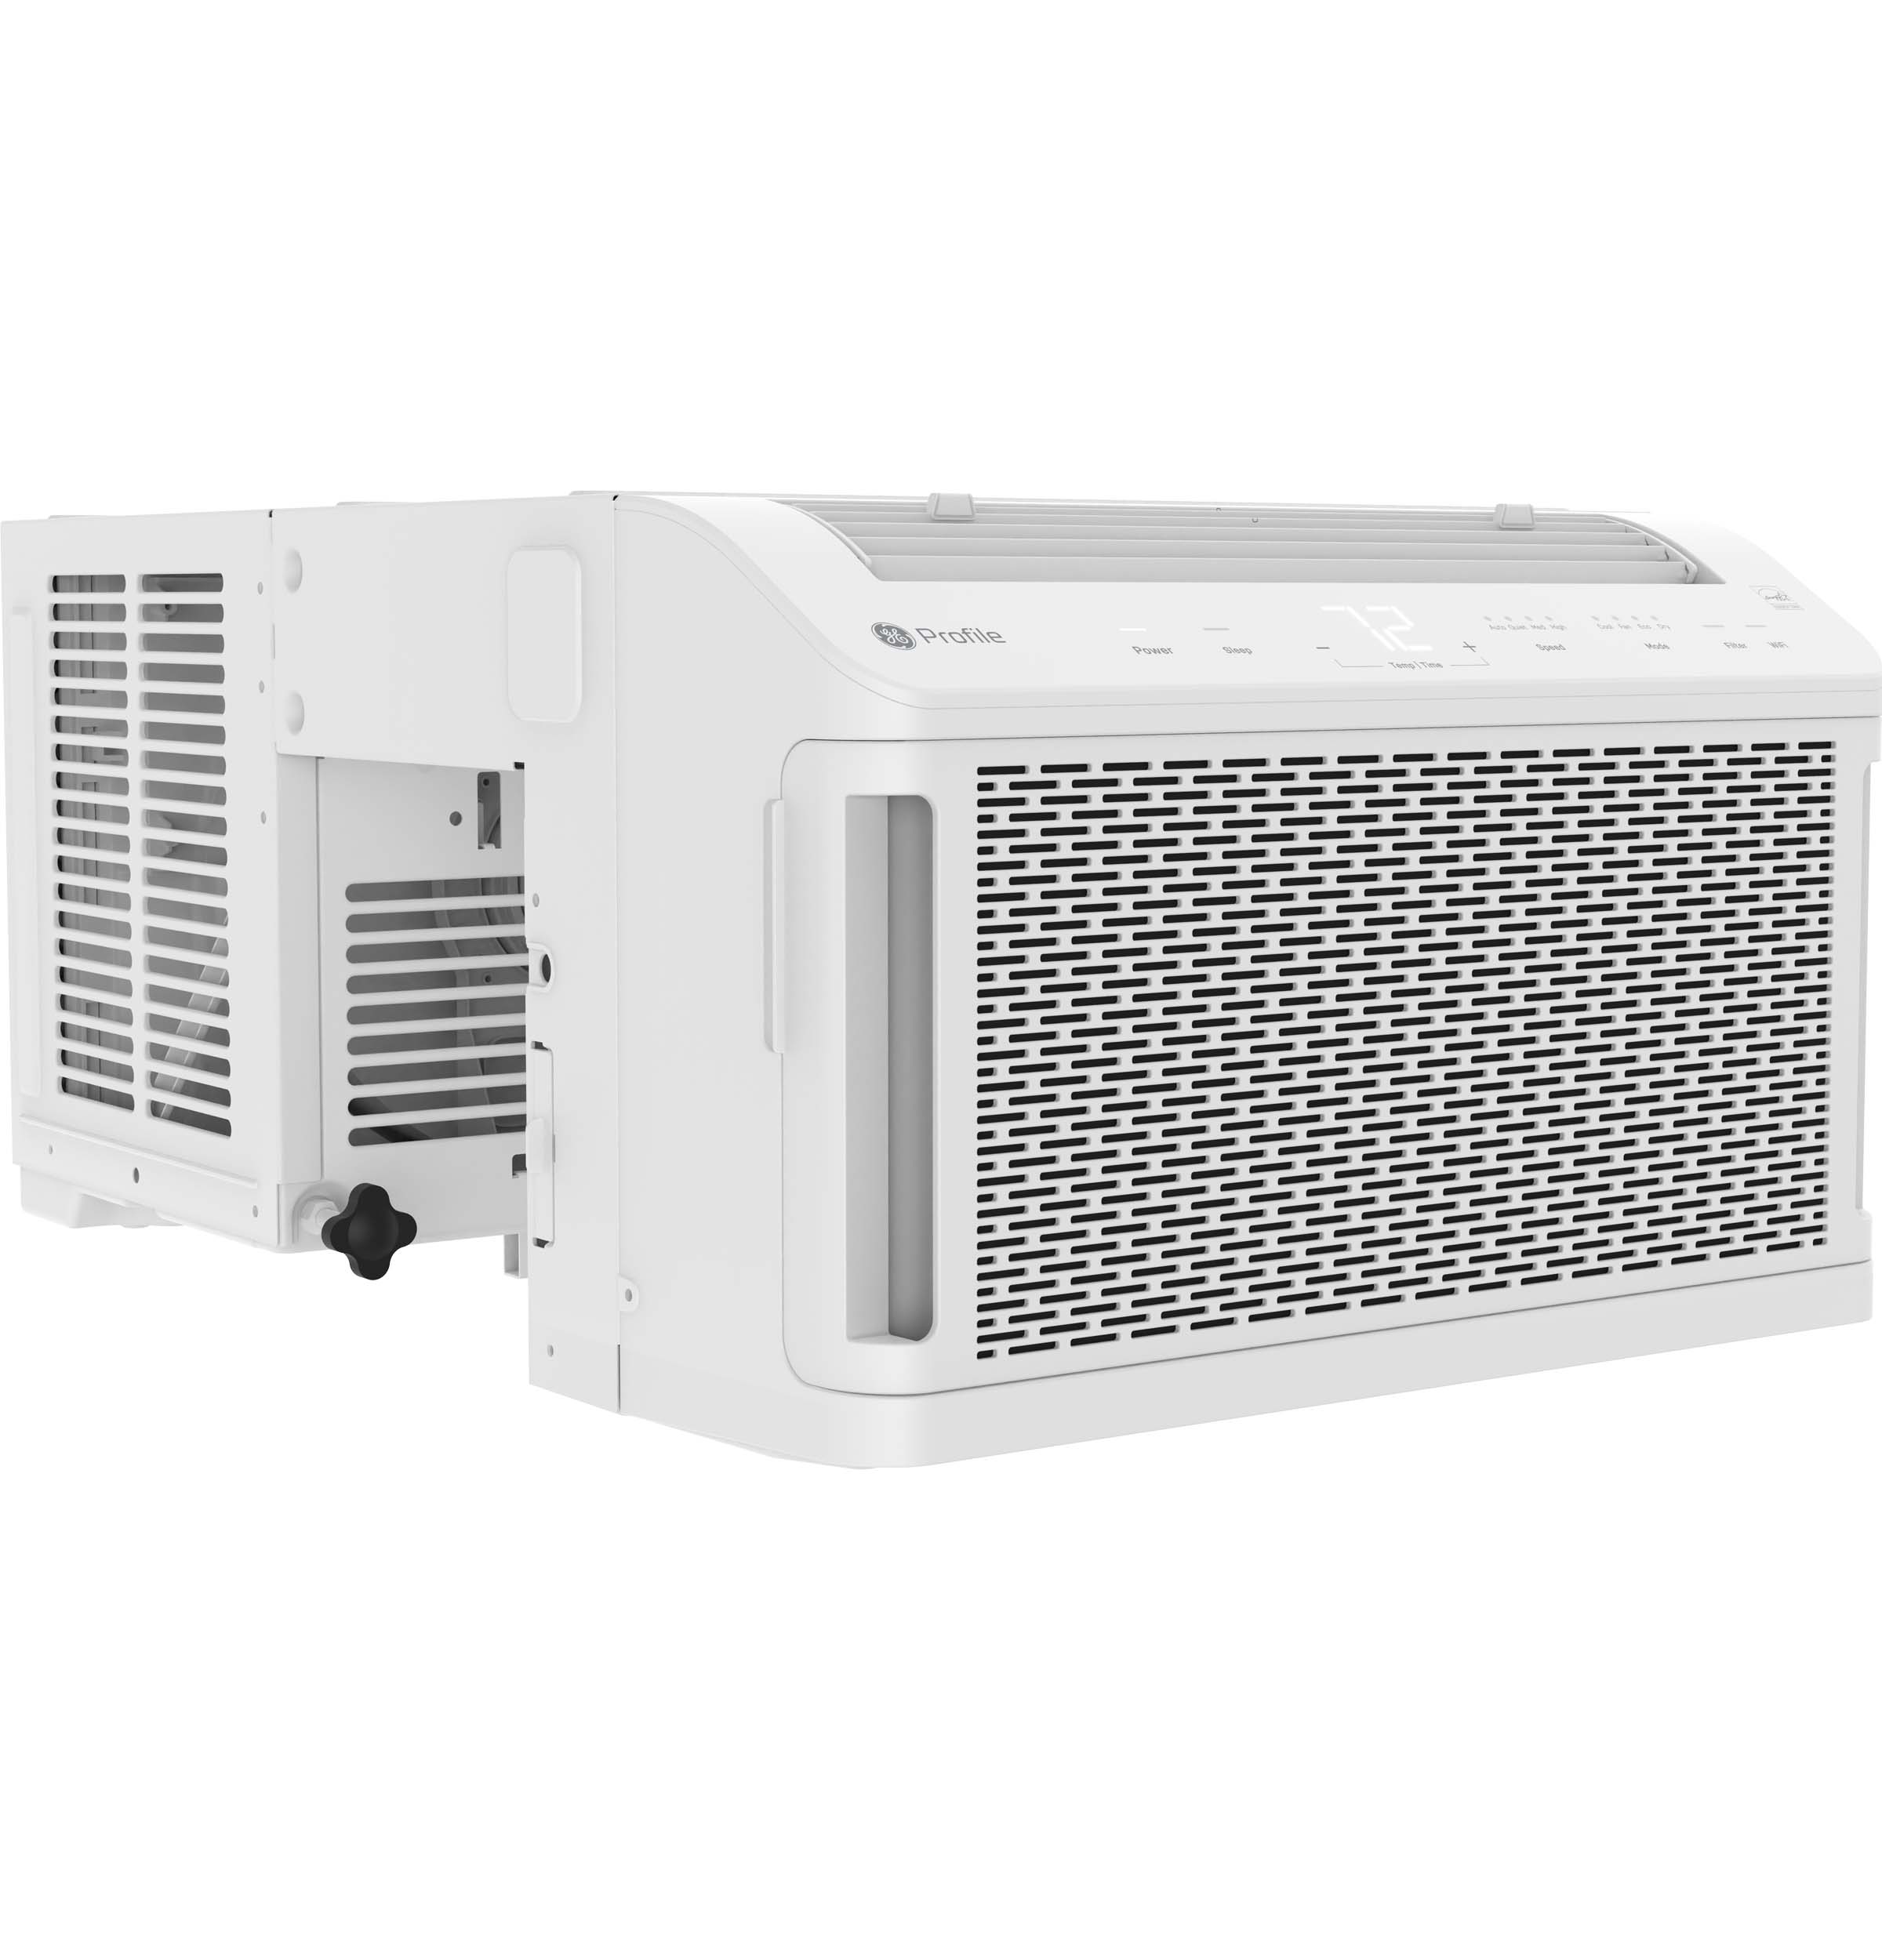 GE 8,000 BTU 110V Smart Window-Mounted Air Conditioner with Wi-Fi - image 1 of 5